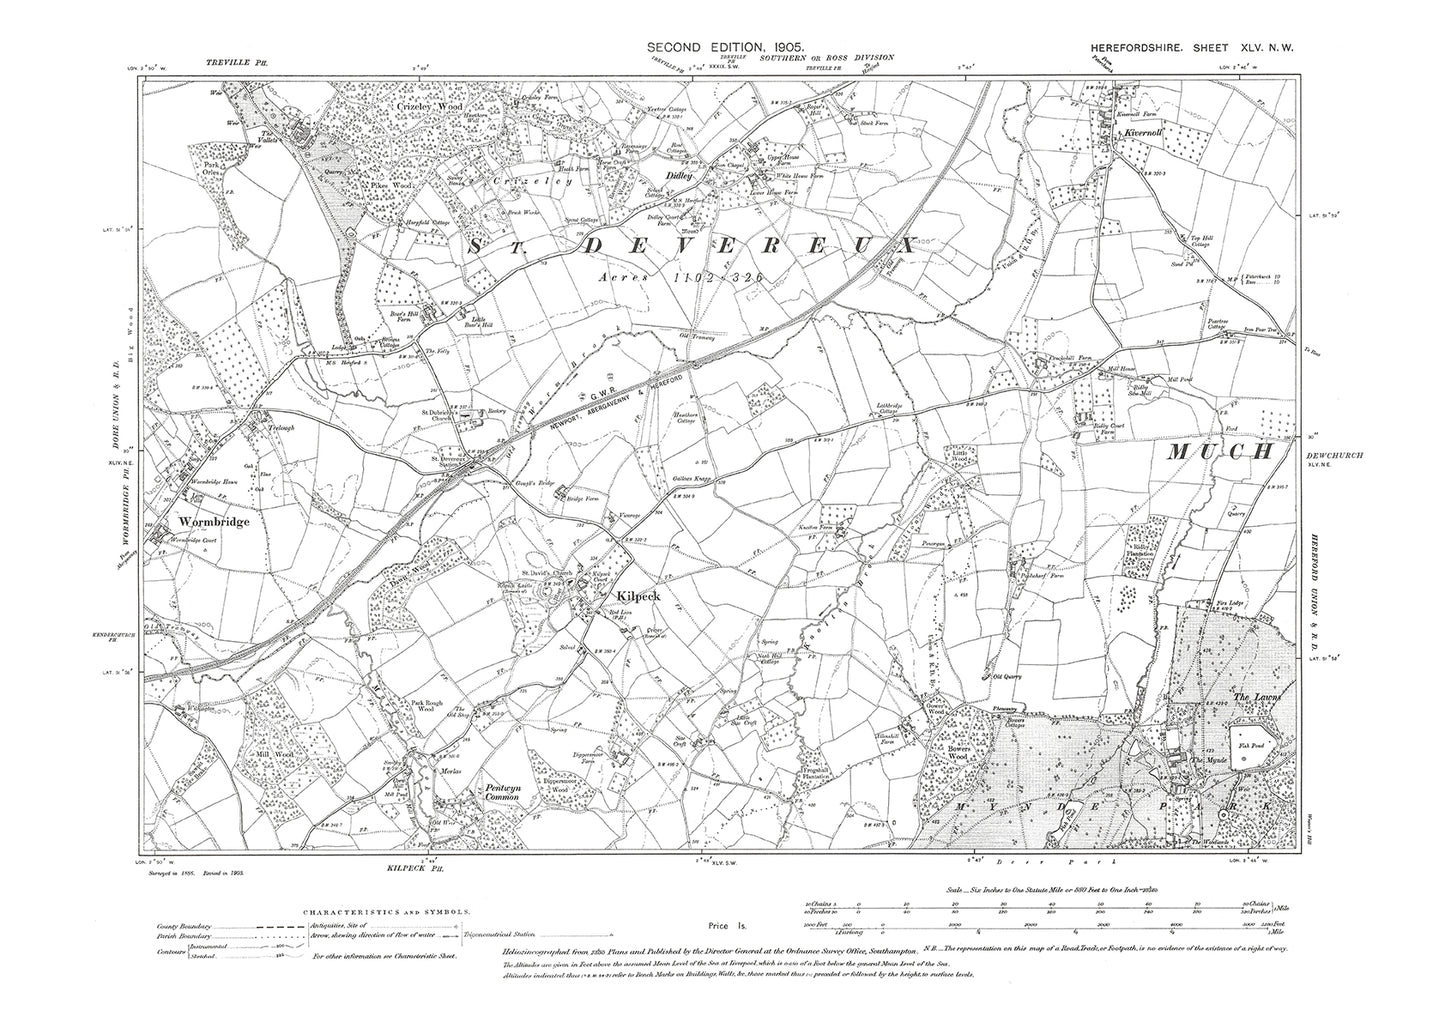 Old OS map dated 1905, showing Wormbridge, Kilpeck, Didley in Herefordshire - 45NW